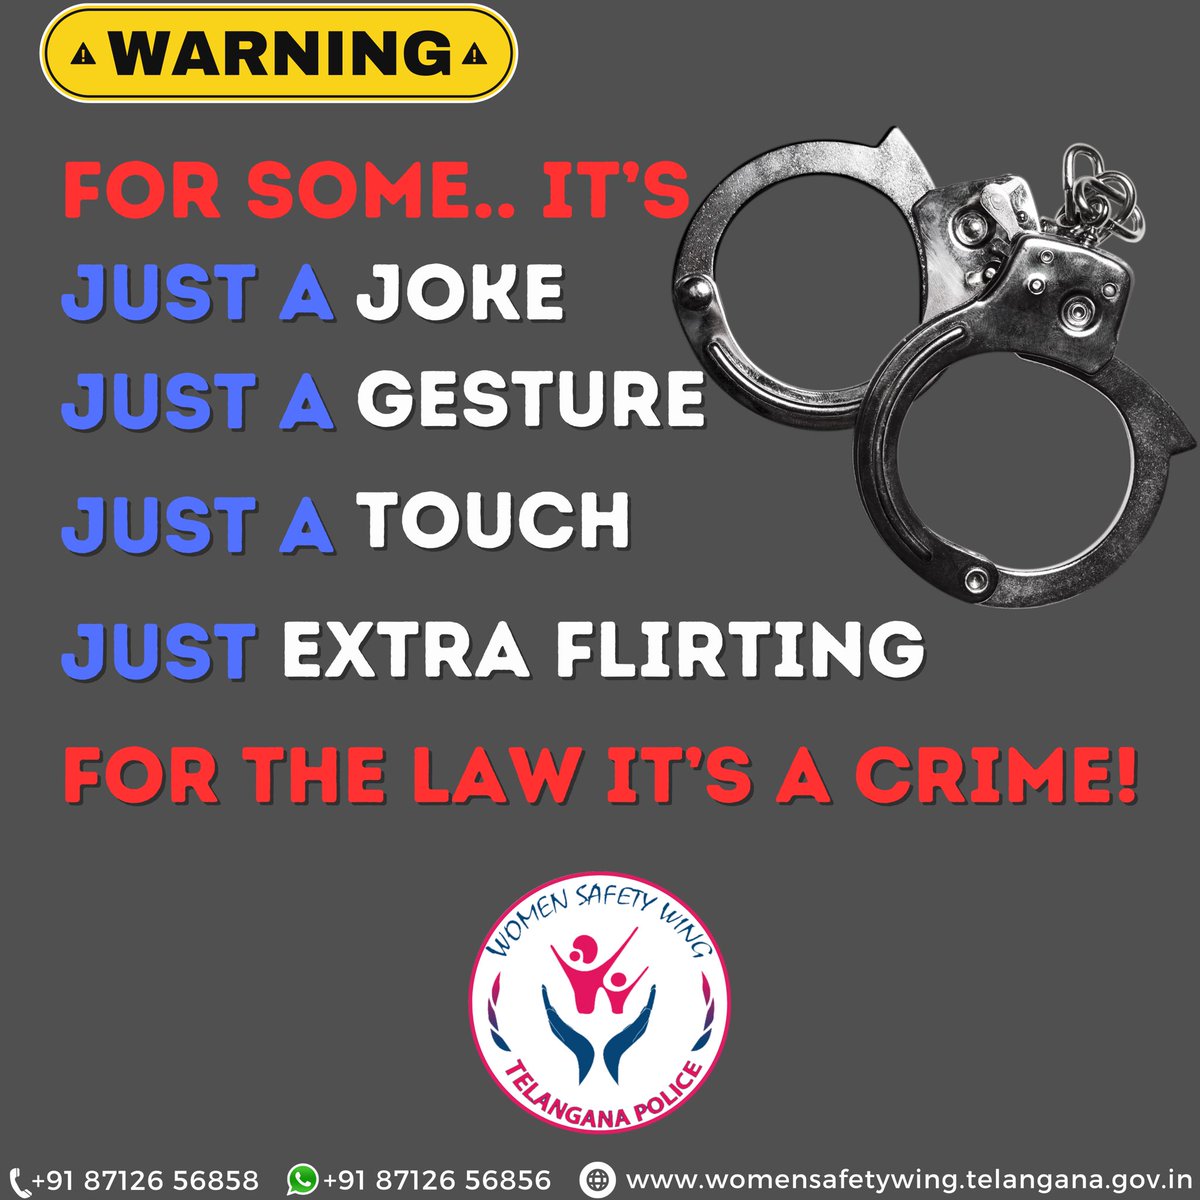 Gentle warning to some.. Do not underestimate the power of law. #WomenSafetyWing @TS_SheTeams @ts_ahtuofficial @Bharosa_TSWSW are always watching you. #Women #Girls #Men #Man #SheTeams #AHTU #Bharosa #PridePlace #Sahas #Telangana #India